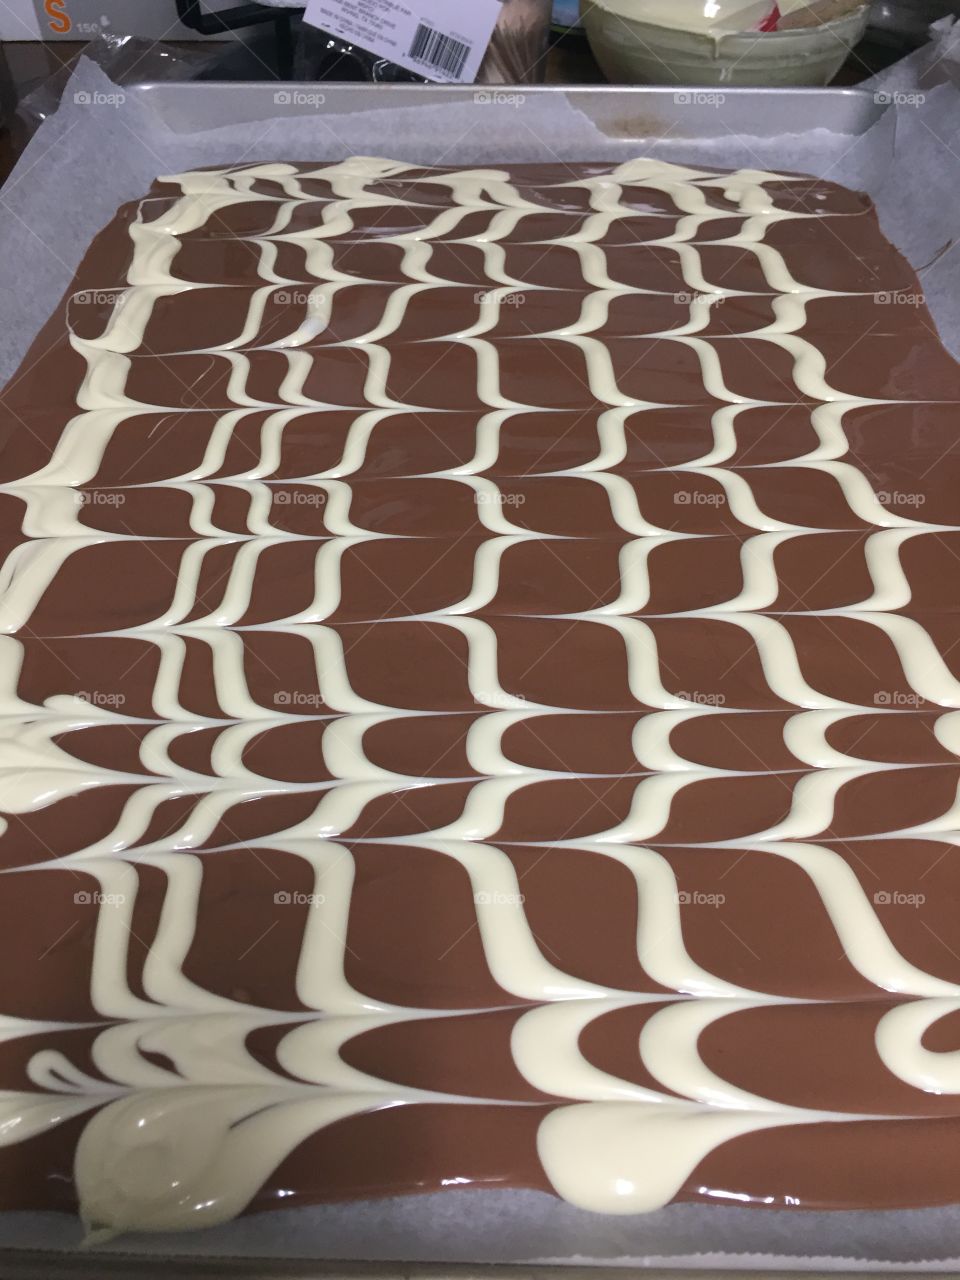 Chocolate pattern. Delicious and pretty! 